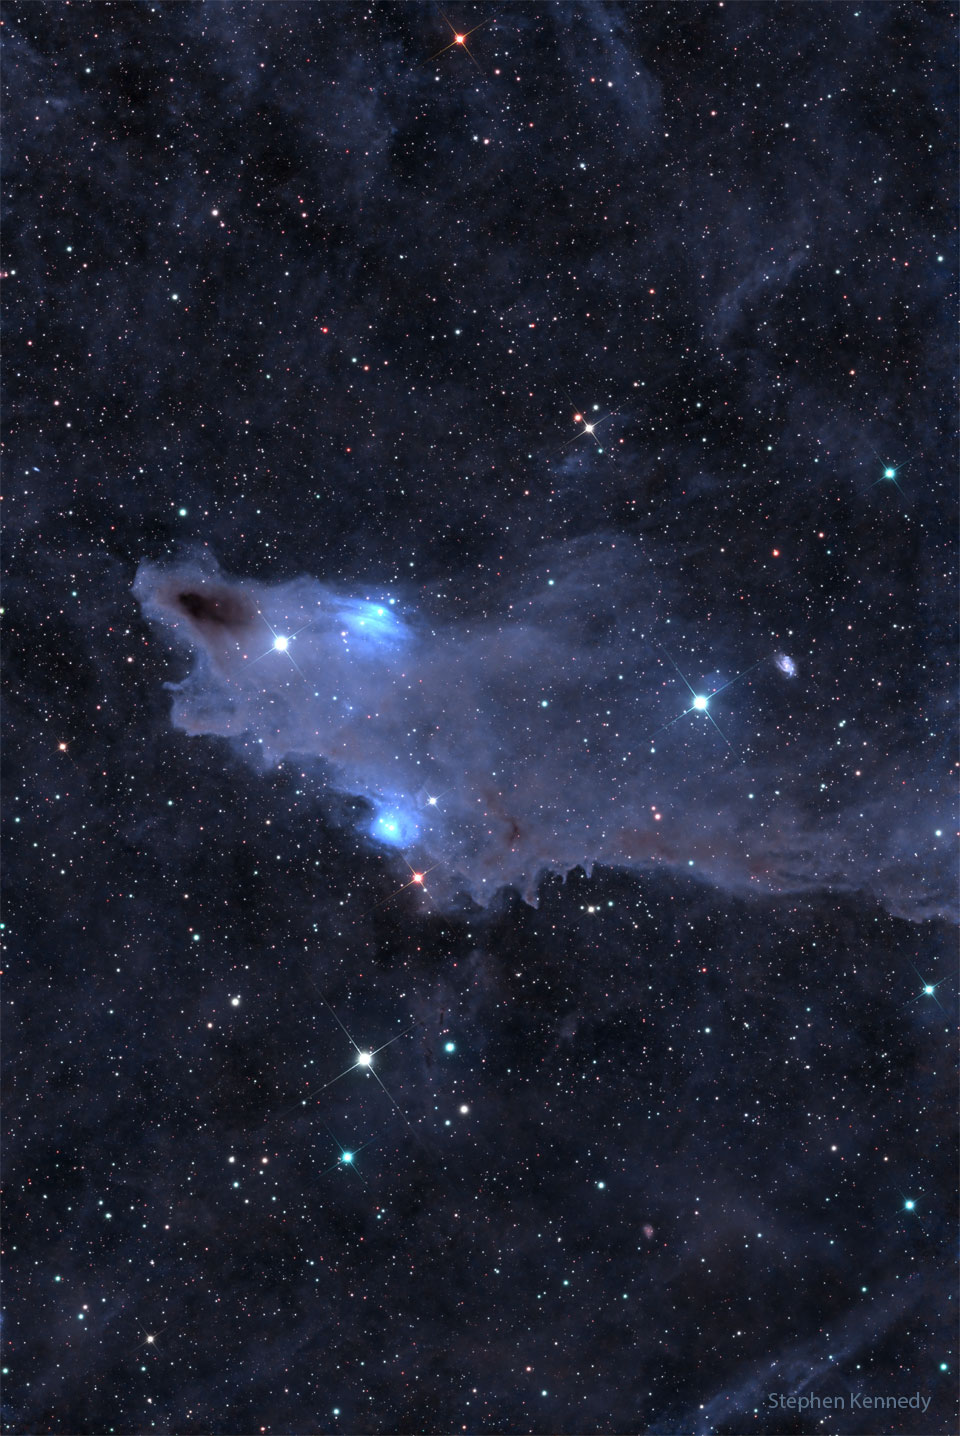 A dark brown cloud that appears similar to a shark is seen
against a background filled with stars and less prominent 
blue-shaded nebulas.
Please see the explanation for more detailed information.